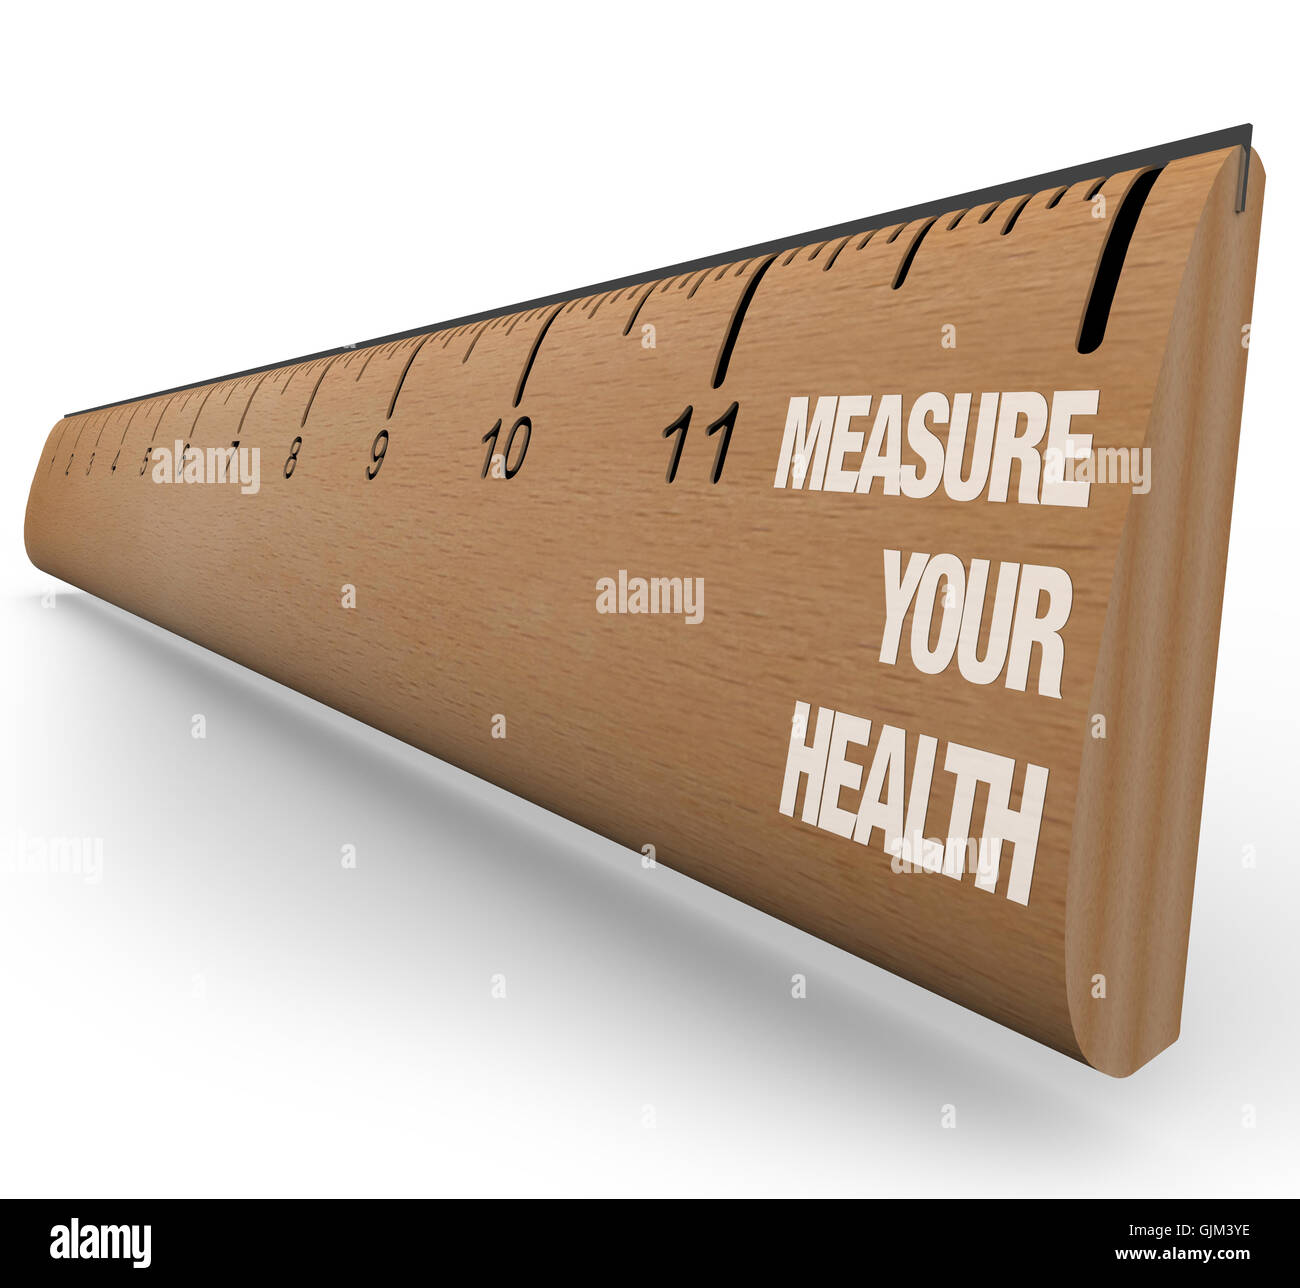 Ruler - Measure Your Health Stock Photo